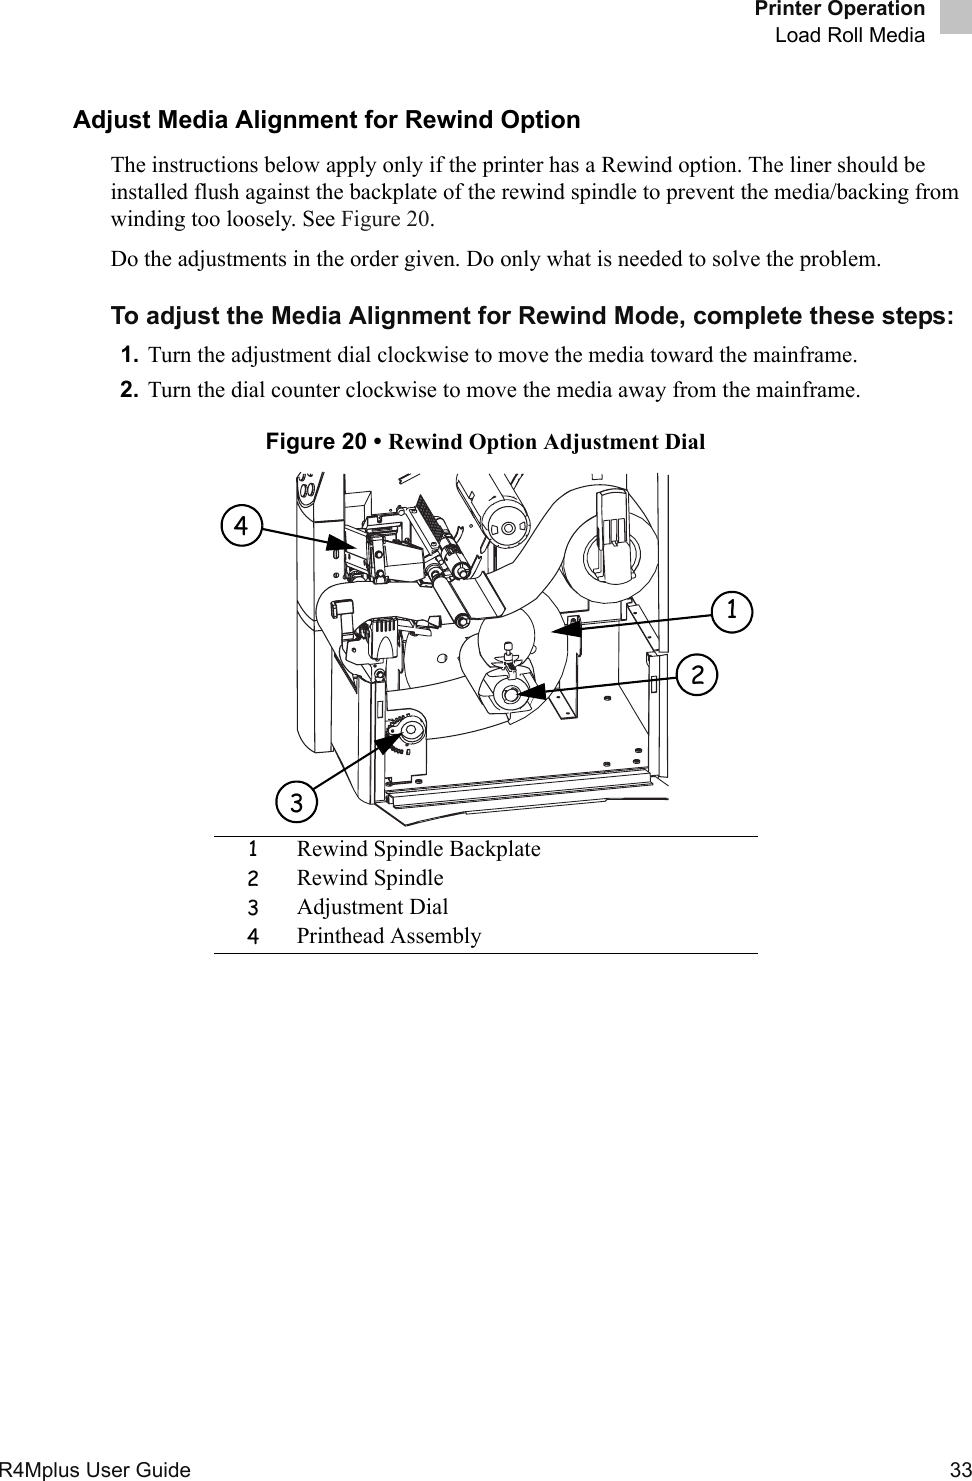 Printer OperationLoad Roll MediaR4Mplus User Guide  33Adjust Media Alignment for Rewind OptionThe instructions below apply only if the printer has a Rewind option. The liner should be installed flush against the backplate of the rewind spindle to prevent the media/backing from winding too loosely. See Figure 20.Do the adjustments in the order given. Do only what is needed to solve the problem.To adjust the Media Alignment for Rewind Mode, complete these steps:1. Turn the adjustment dial clockwise to move the media toward the mainframe. 2. Turn the dial counter clockwise to move the media away from the mainframe.Figure 20 • Rewind Option Adjustment Dial1Rewind Spindle Backplate2Rewind Spindle3Adjustment Dial4Printhead Assembly1243